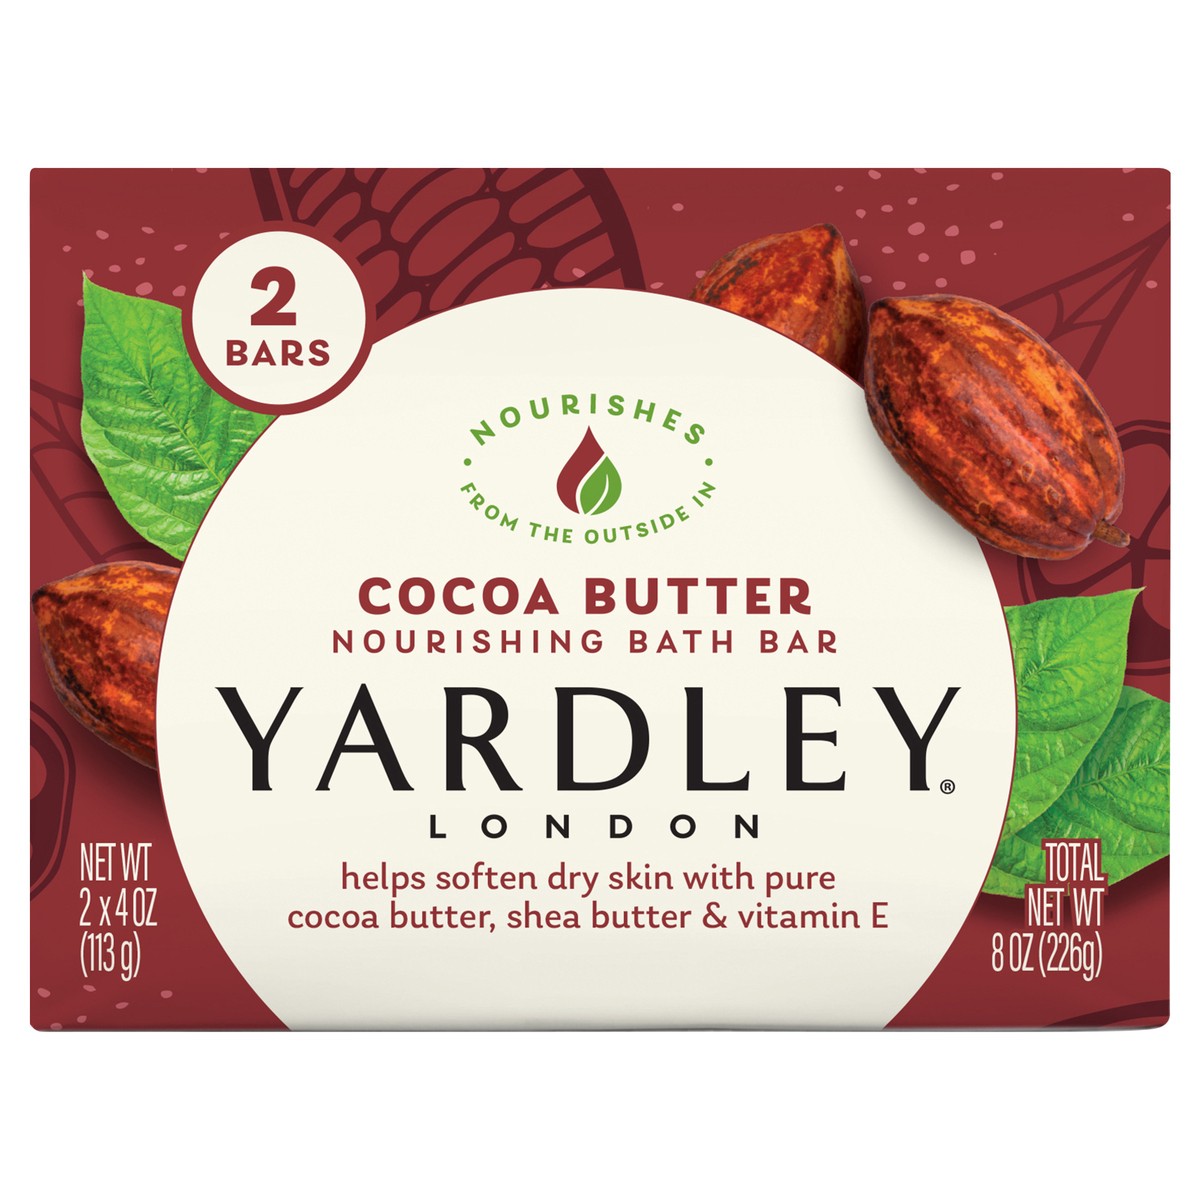 slide 1 of 10, Yardley London Nourishing Bath Soap Bar Cocoa Butter, Helps Soften Dry Skin with Pure Cocoa Butter, Shea Butter & Vitamin E, 4.0 oz Bath Bar, 2 Soap Bars, 2 ct